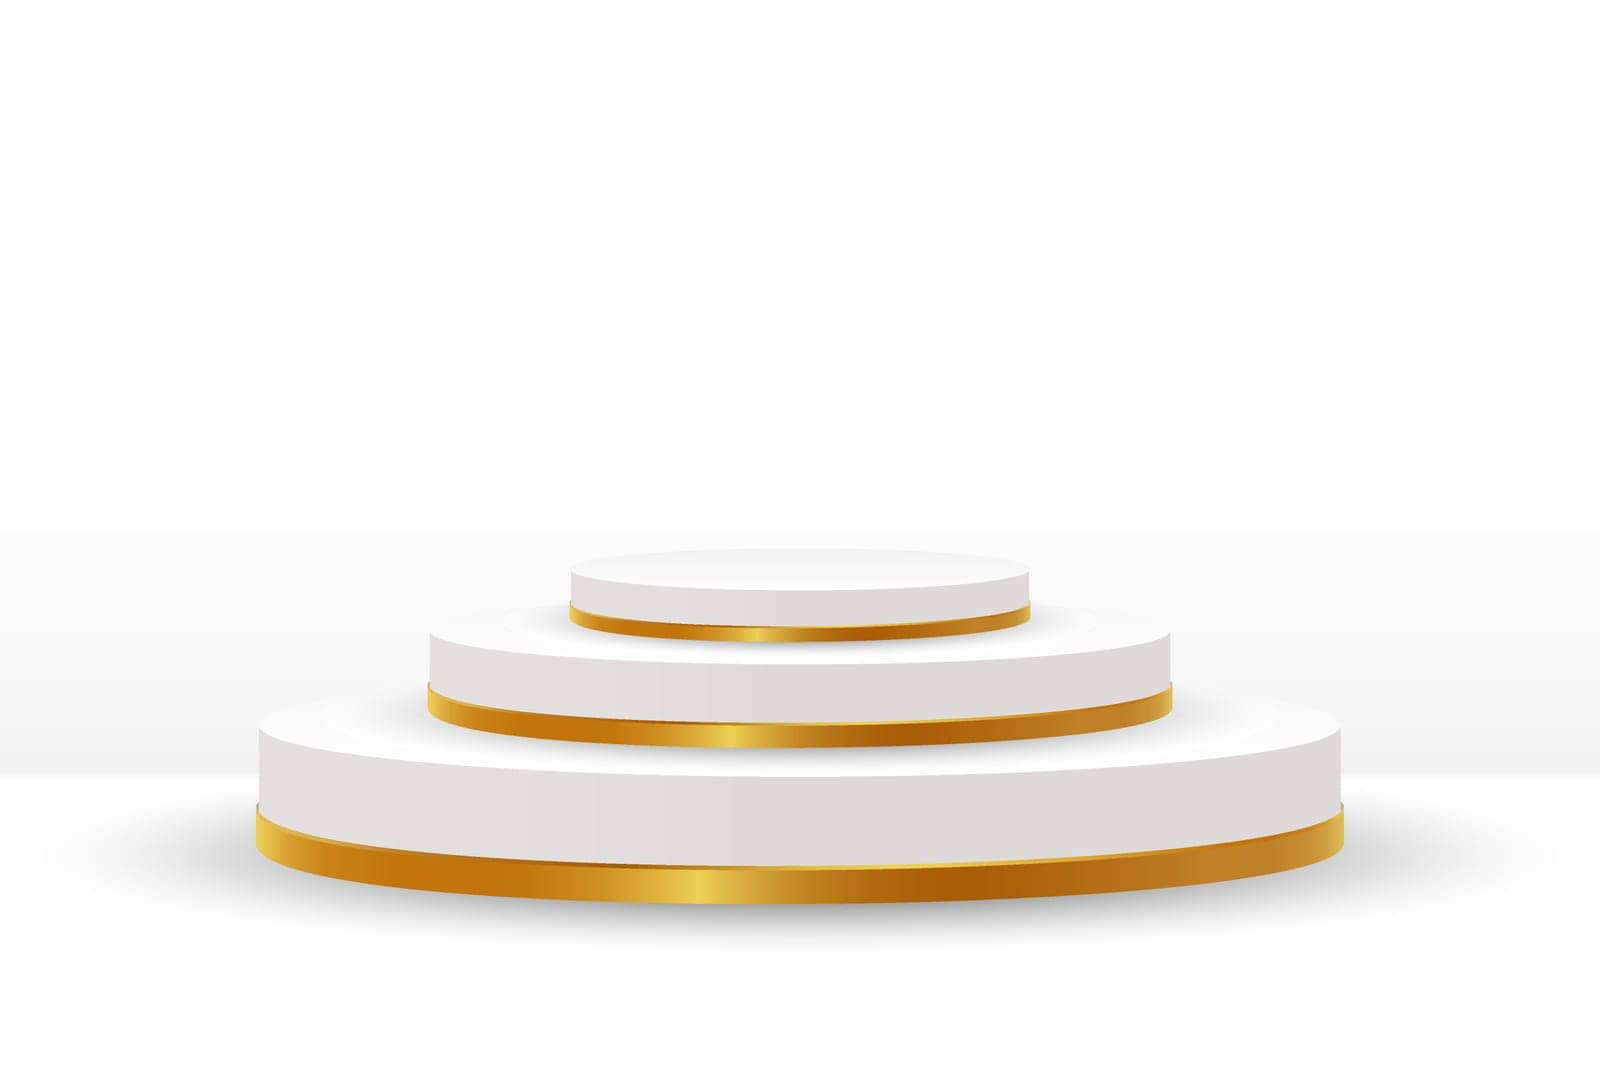 White podium with gold trim on a white background. 3d illustration, vector